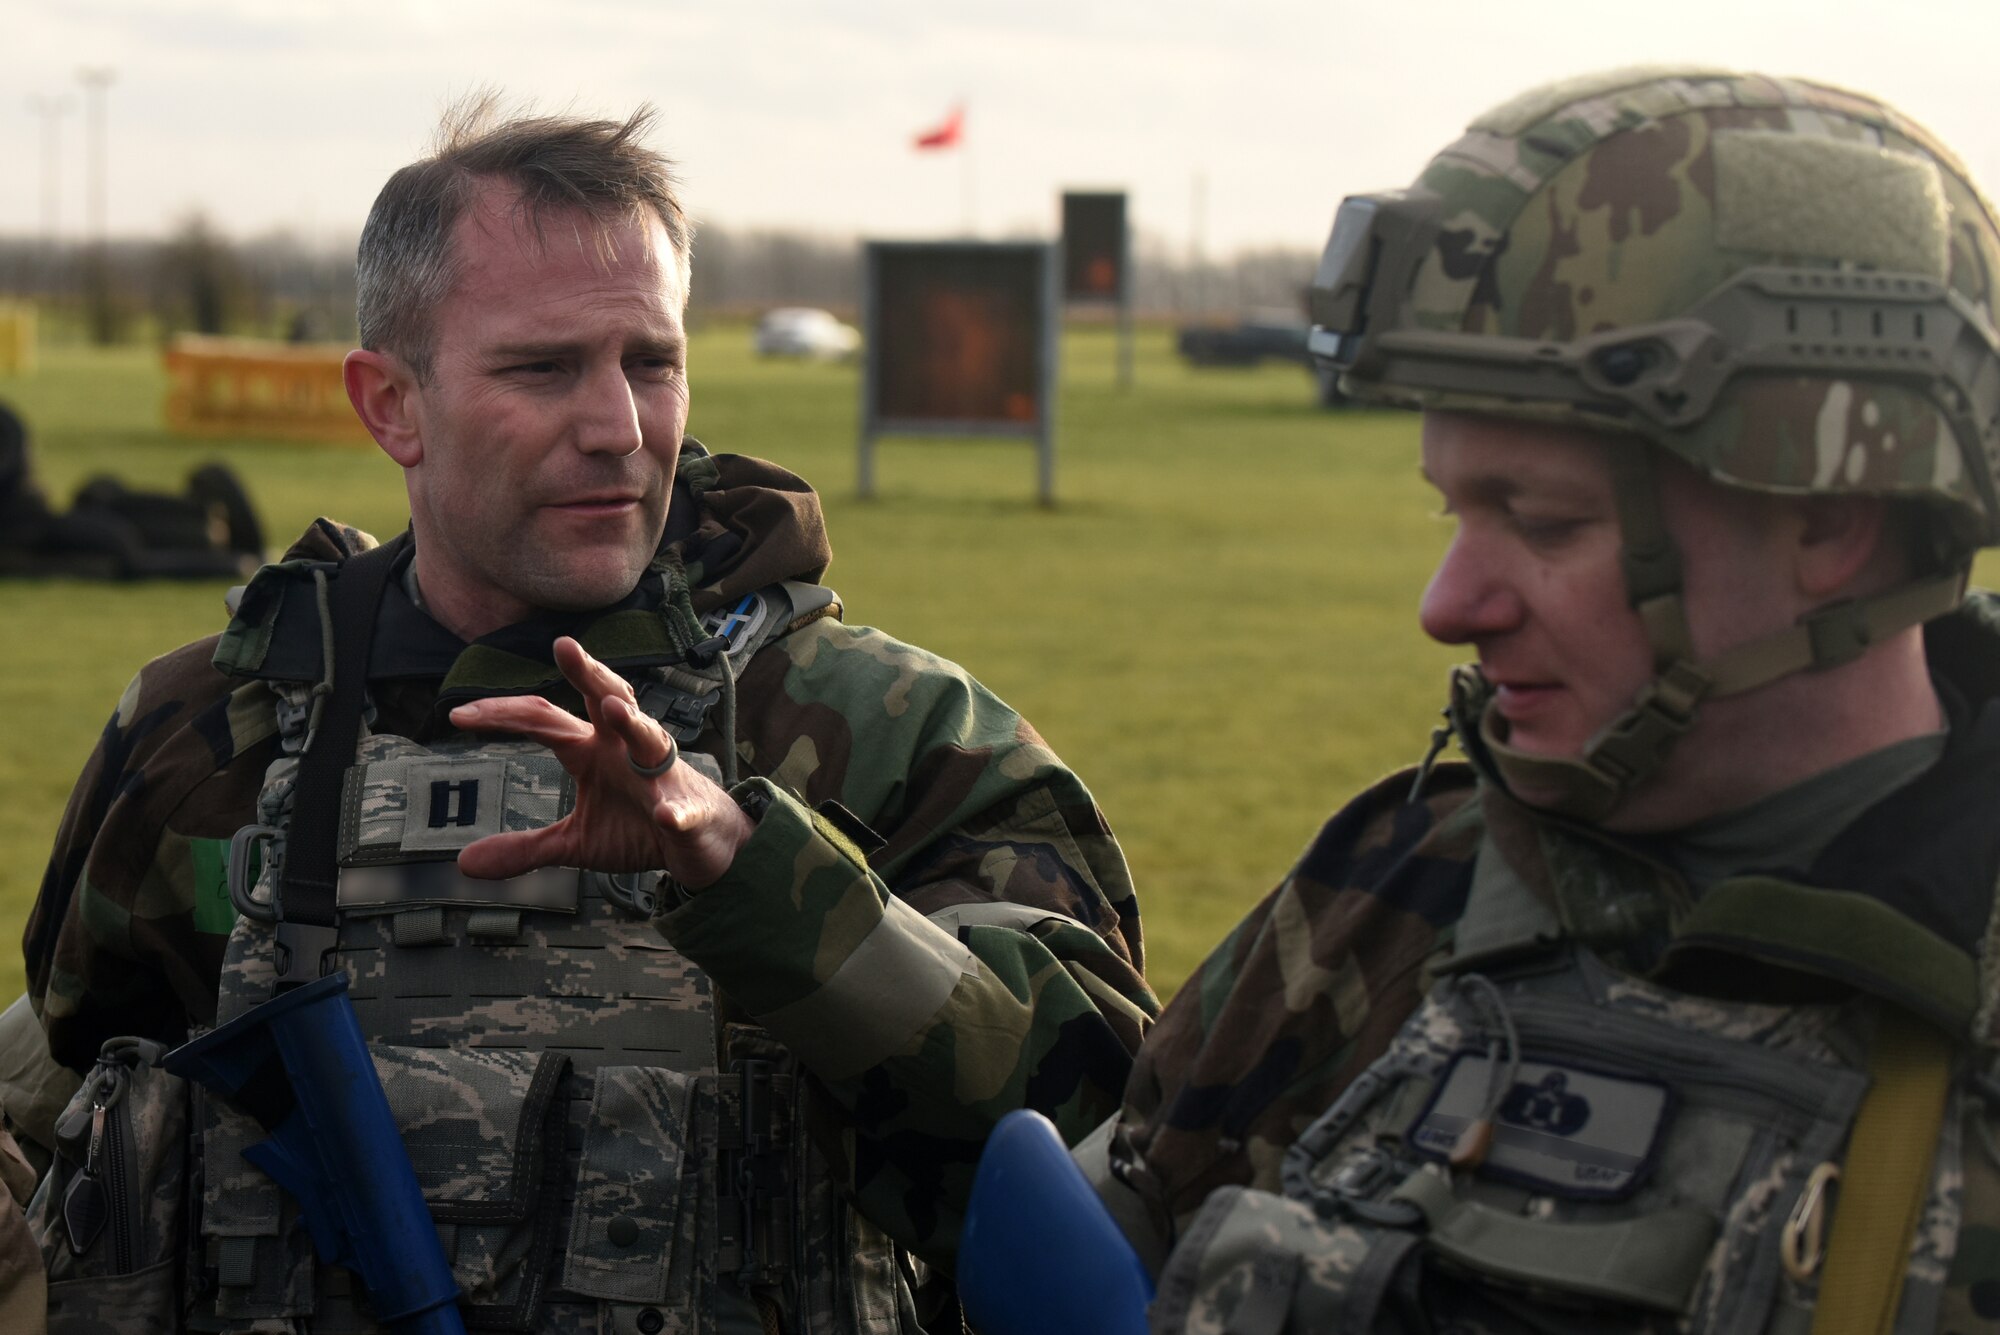 A participant of a chemical, biological, radiological, nuclear and explosive exercise reviews his team’s performance after a drill at Royal Air Force Feltwell, England, Feb. 12. CBRNE exercises provide Airmen a chance to utilize learned techniques in a simulated environment. (U.S. Air Force photo/Airman 1st Class Eli Chevalier)